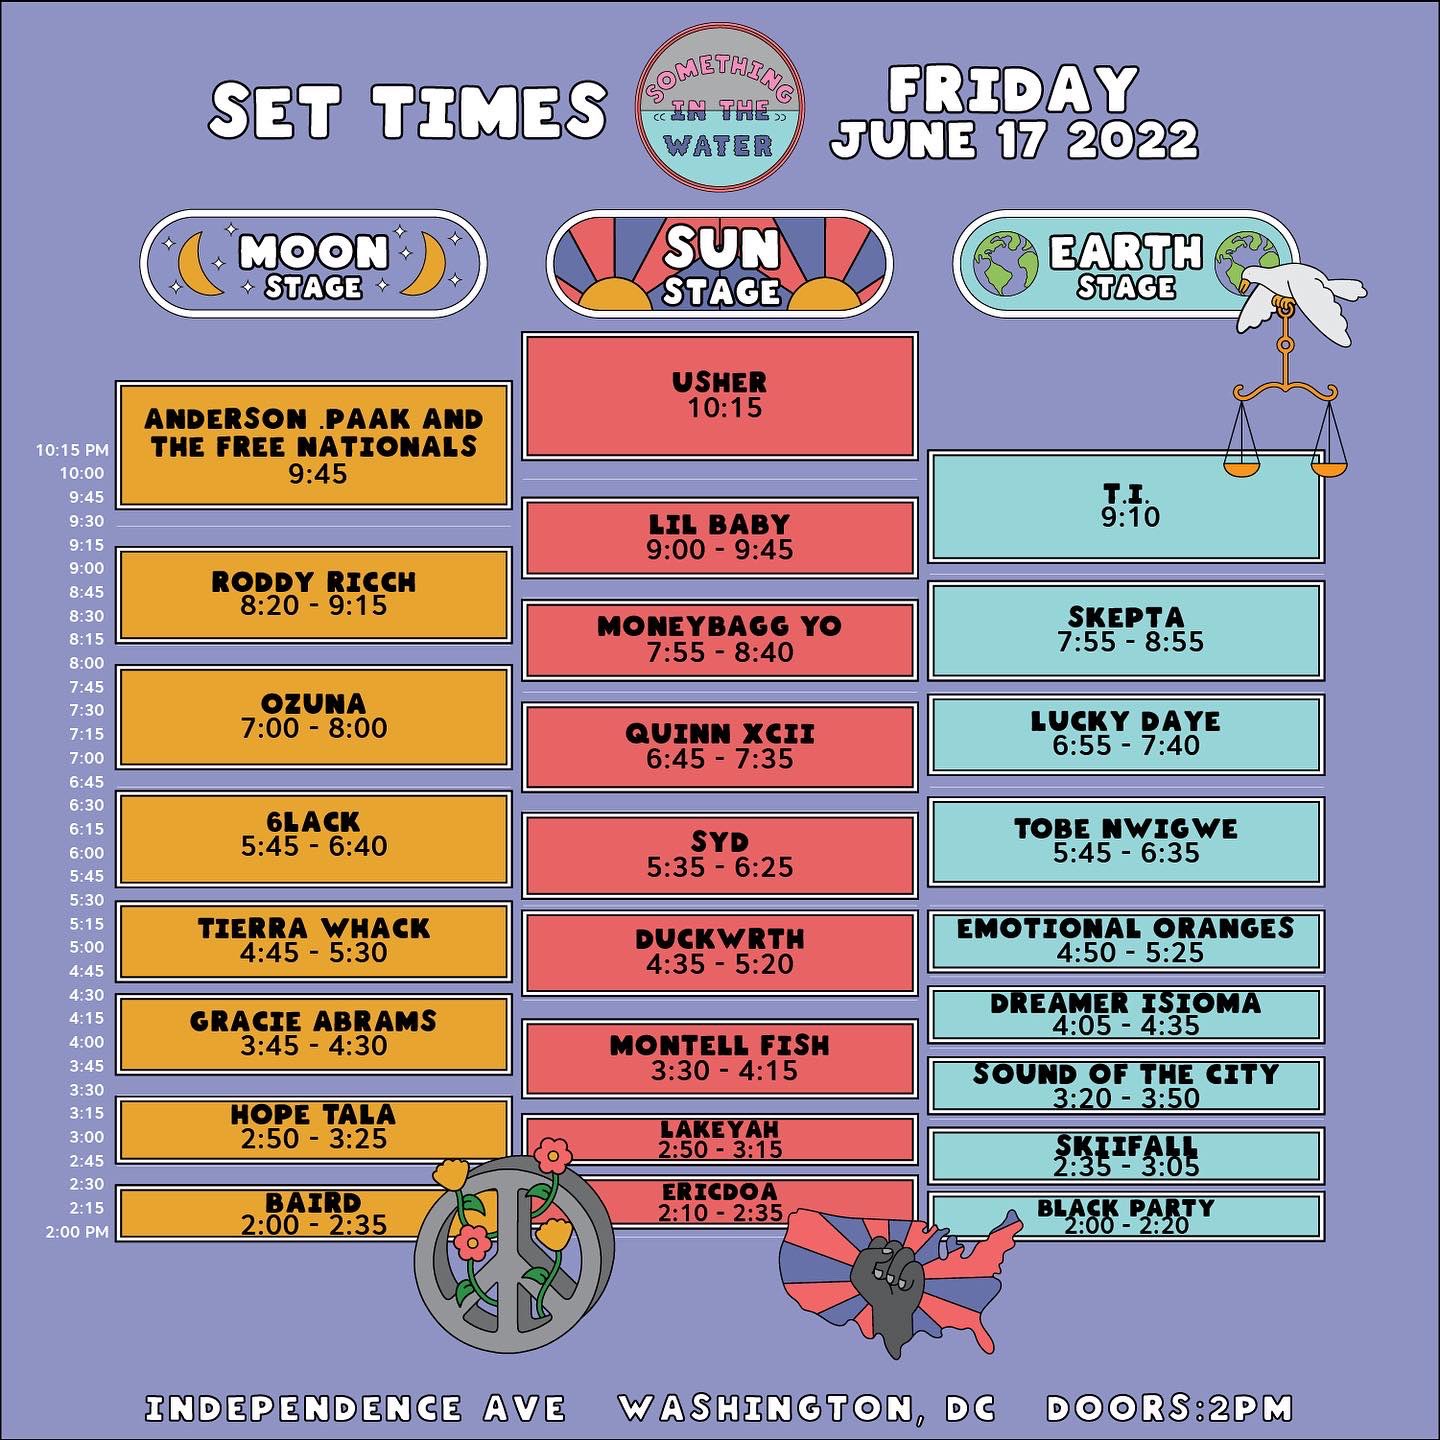 SOMETHING IN THE WATER on Twitter "The official 2022 SITW set times